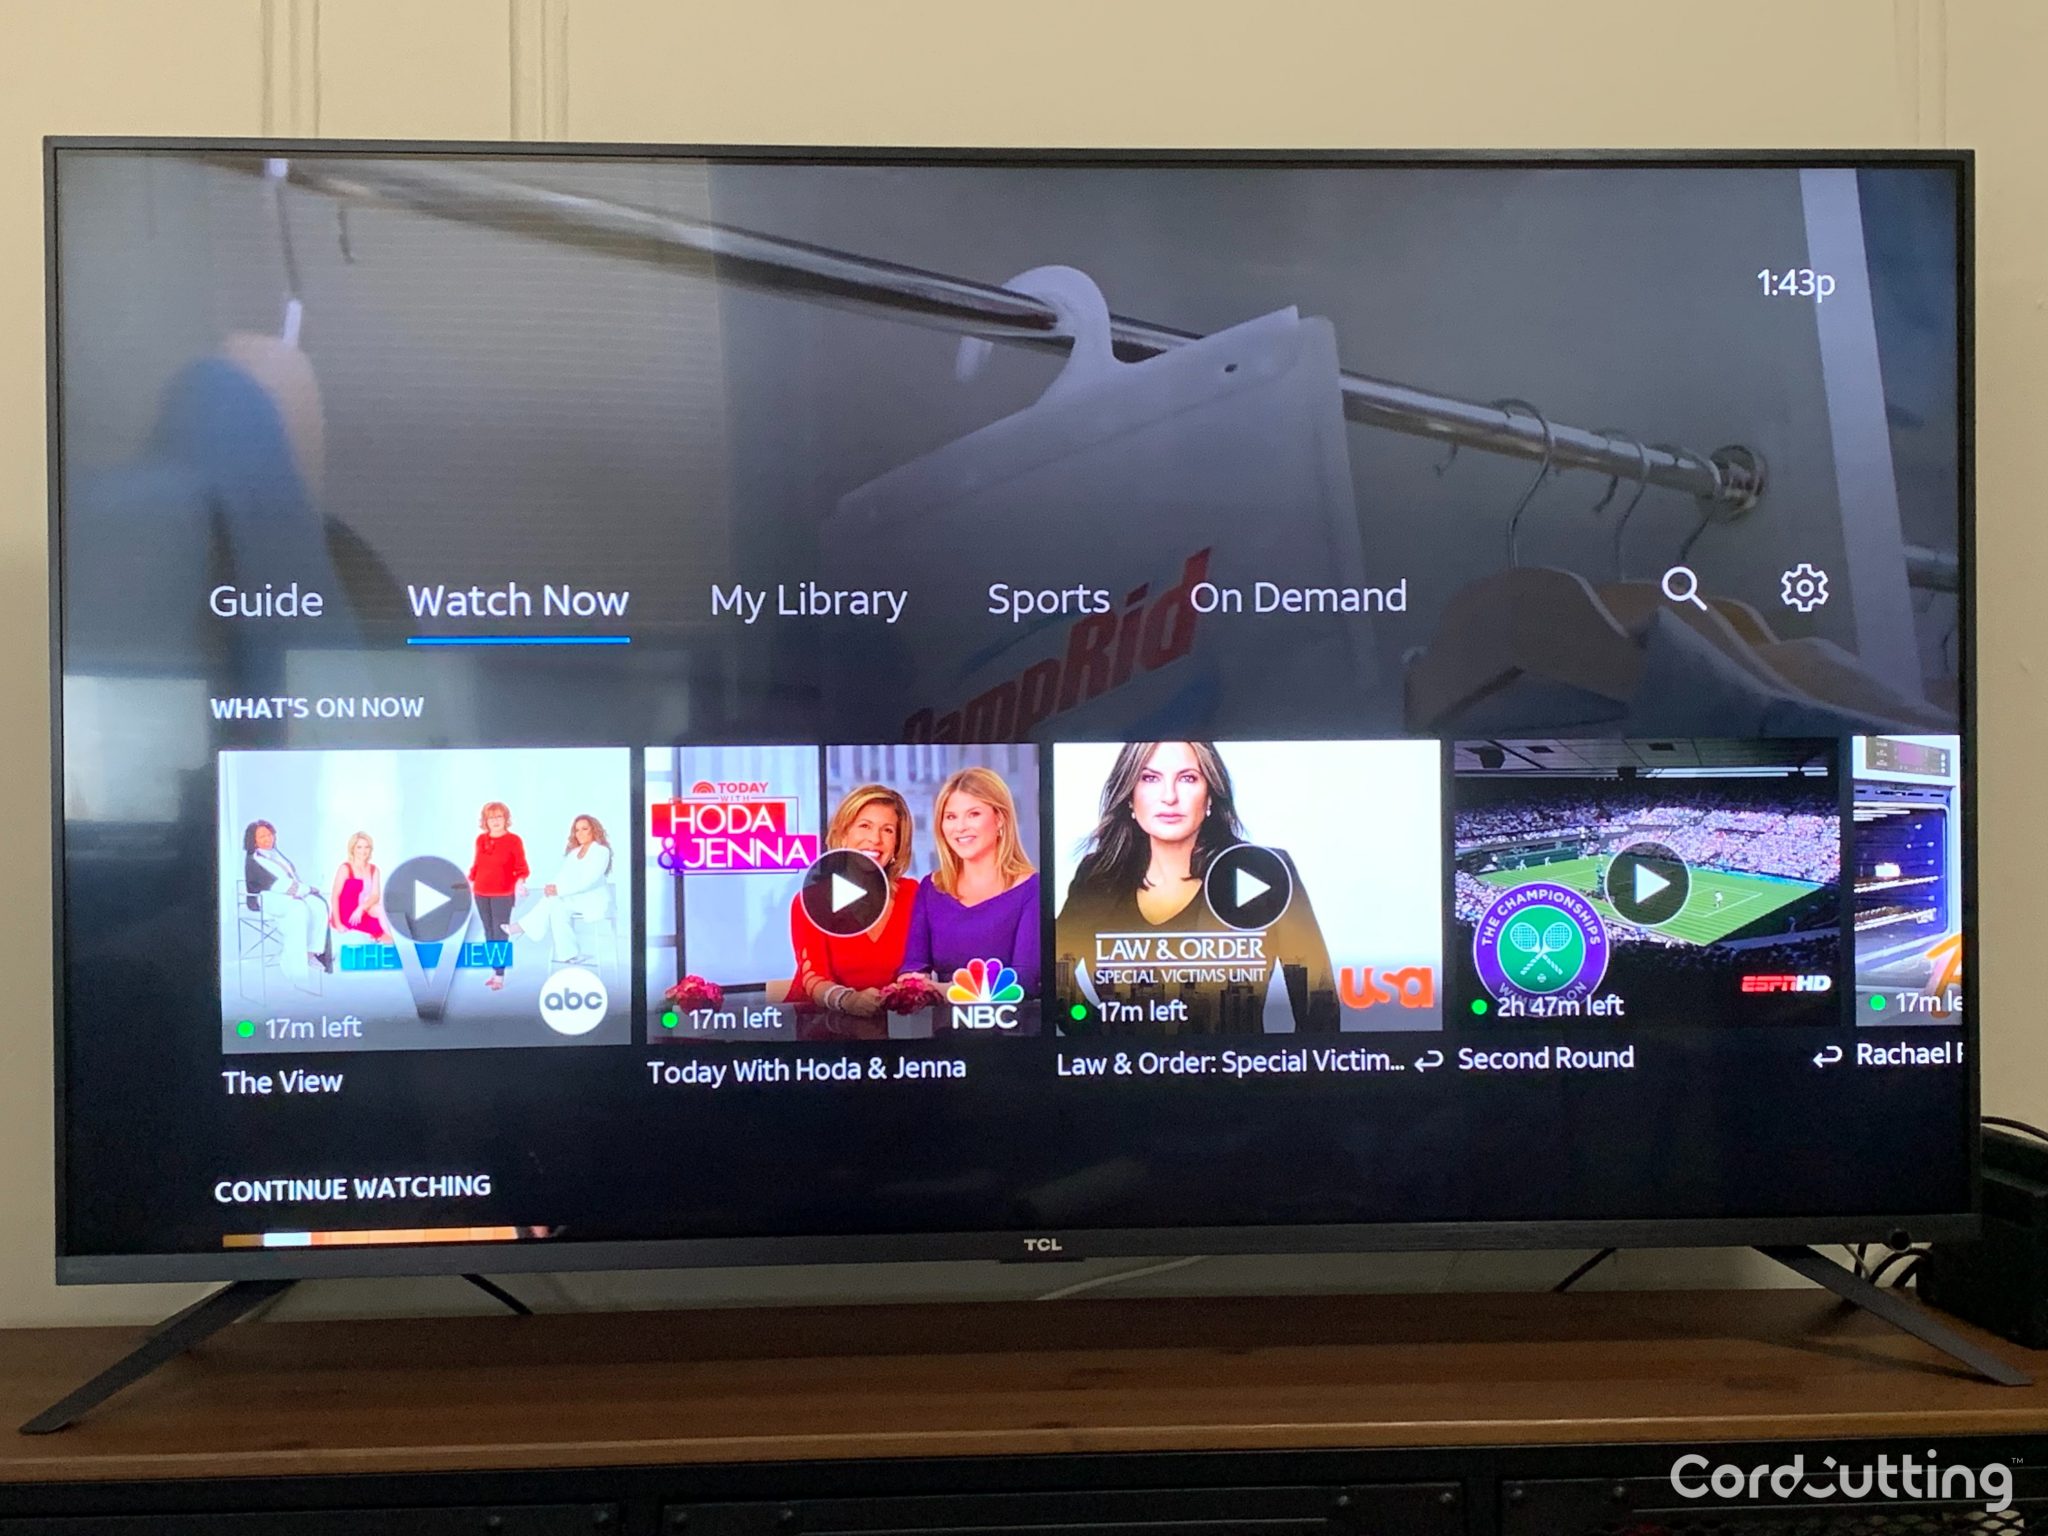 TCL Roku TV Reviews 2022 TCL Roku TV Review for 32, 40 & 55 Inches